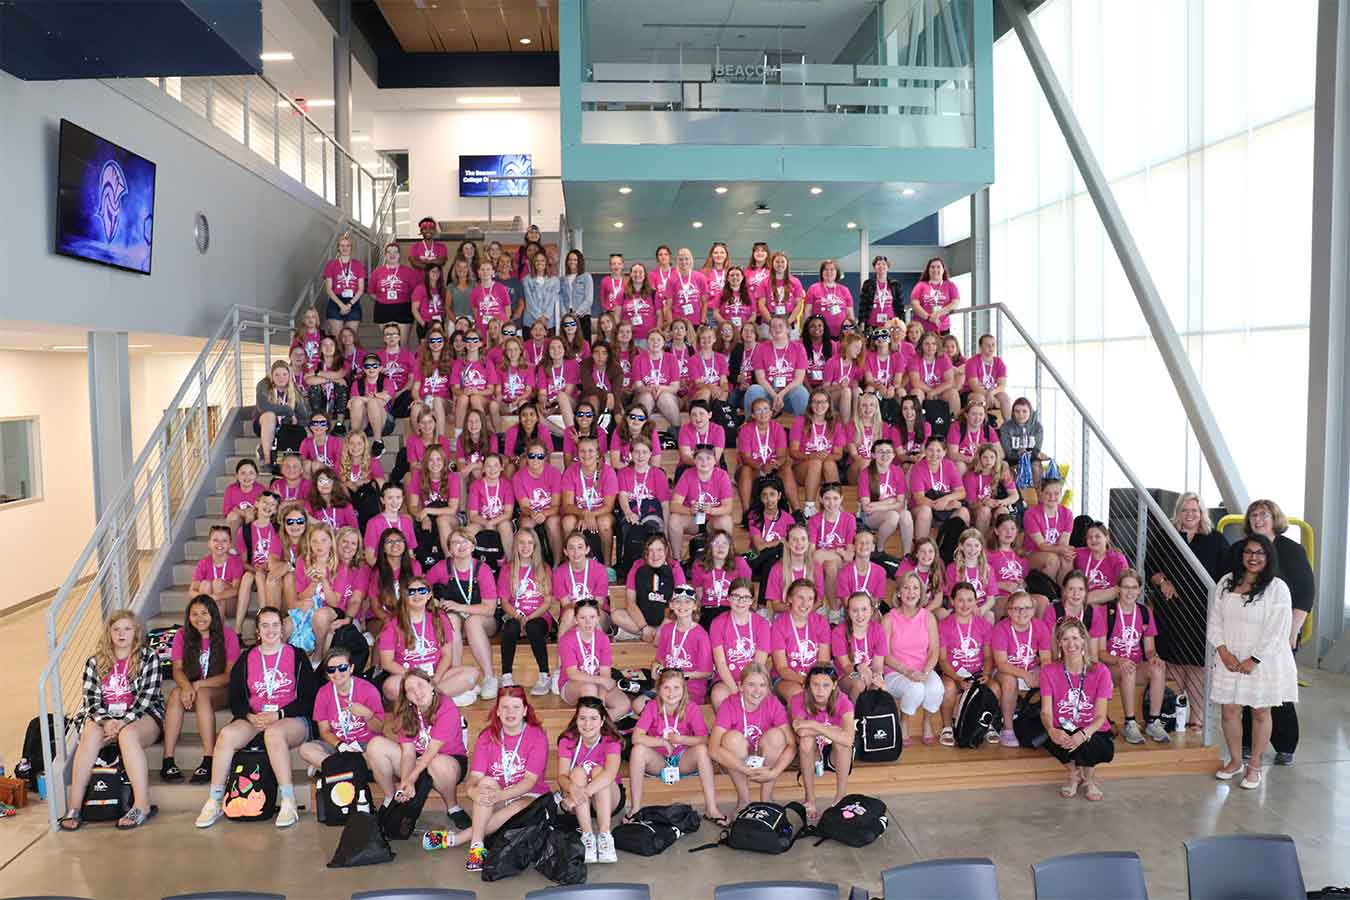 A group photo of the CybHER summer camp attendees from the summer of 2022 sitting on the stairs of The Beacom Institute of Technology.